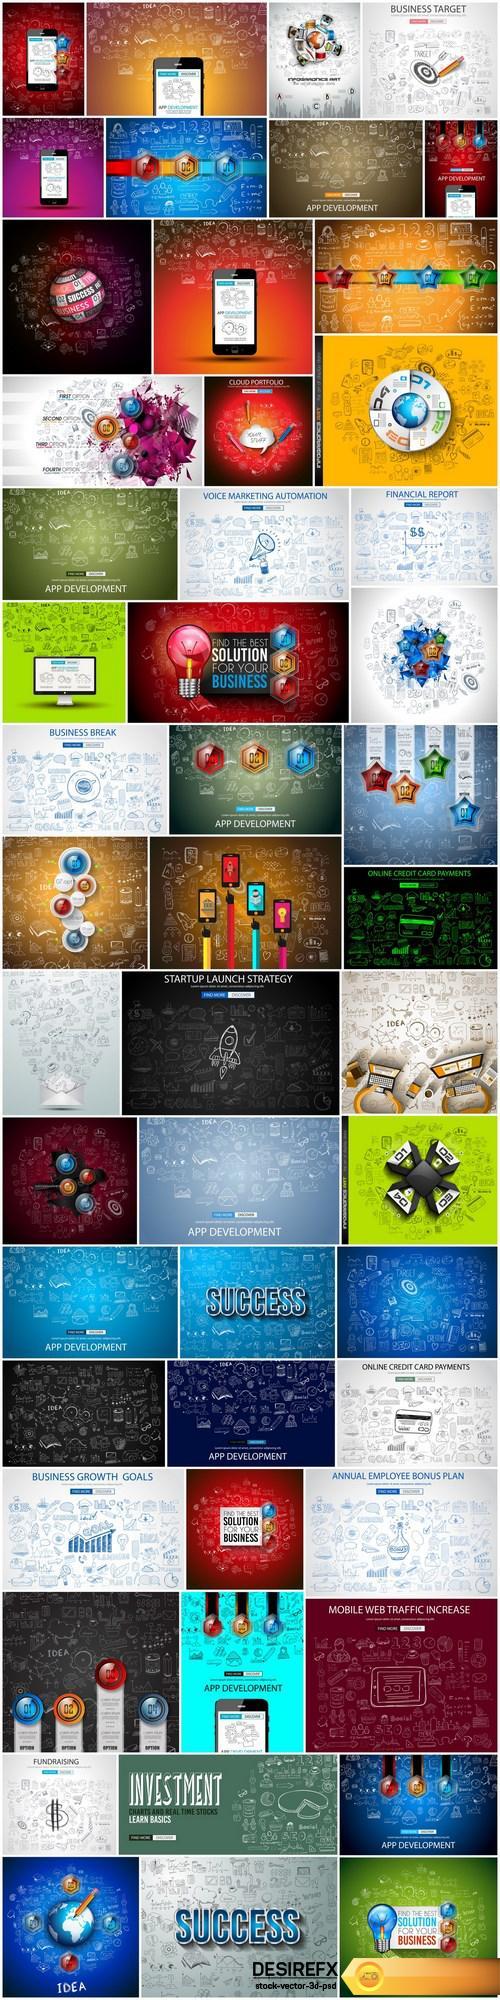 Business concept with doodle design style - 50xEPS